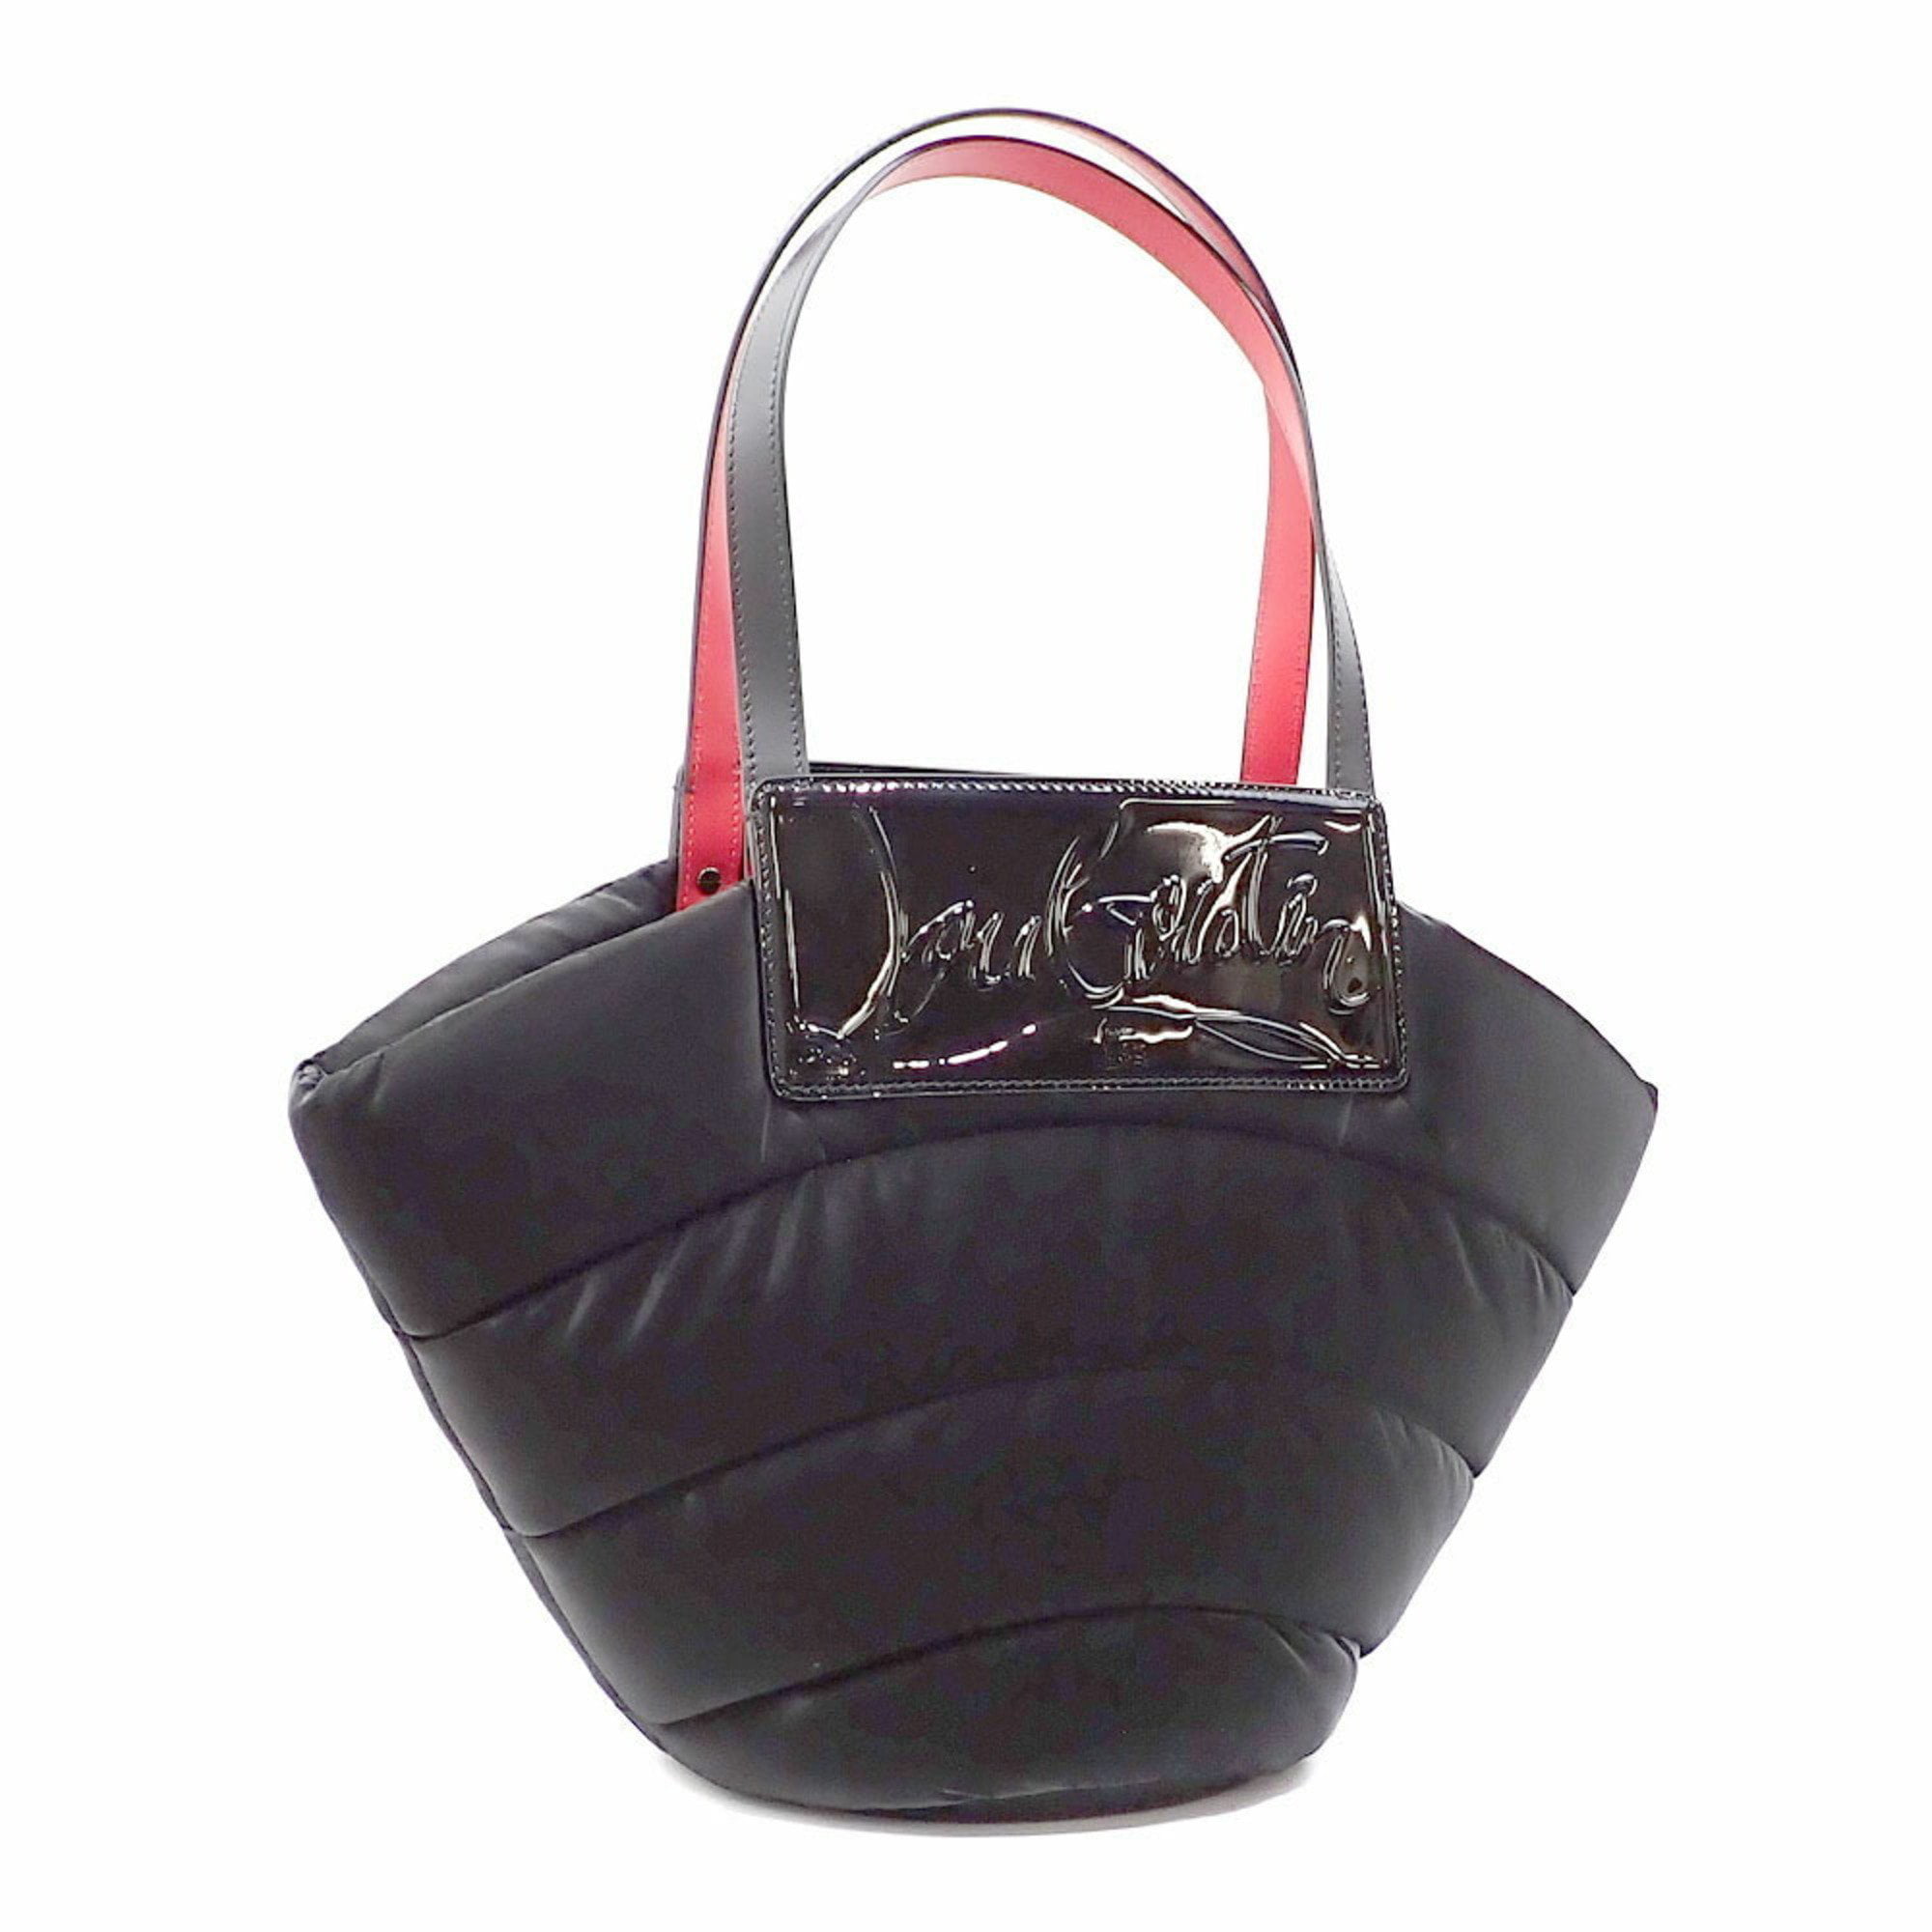 Authenticated Used Christian Louboutin Tote Bag Ladies Black Red